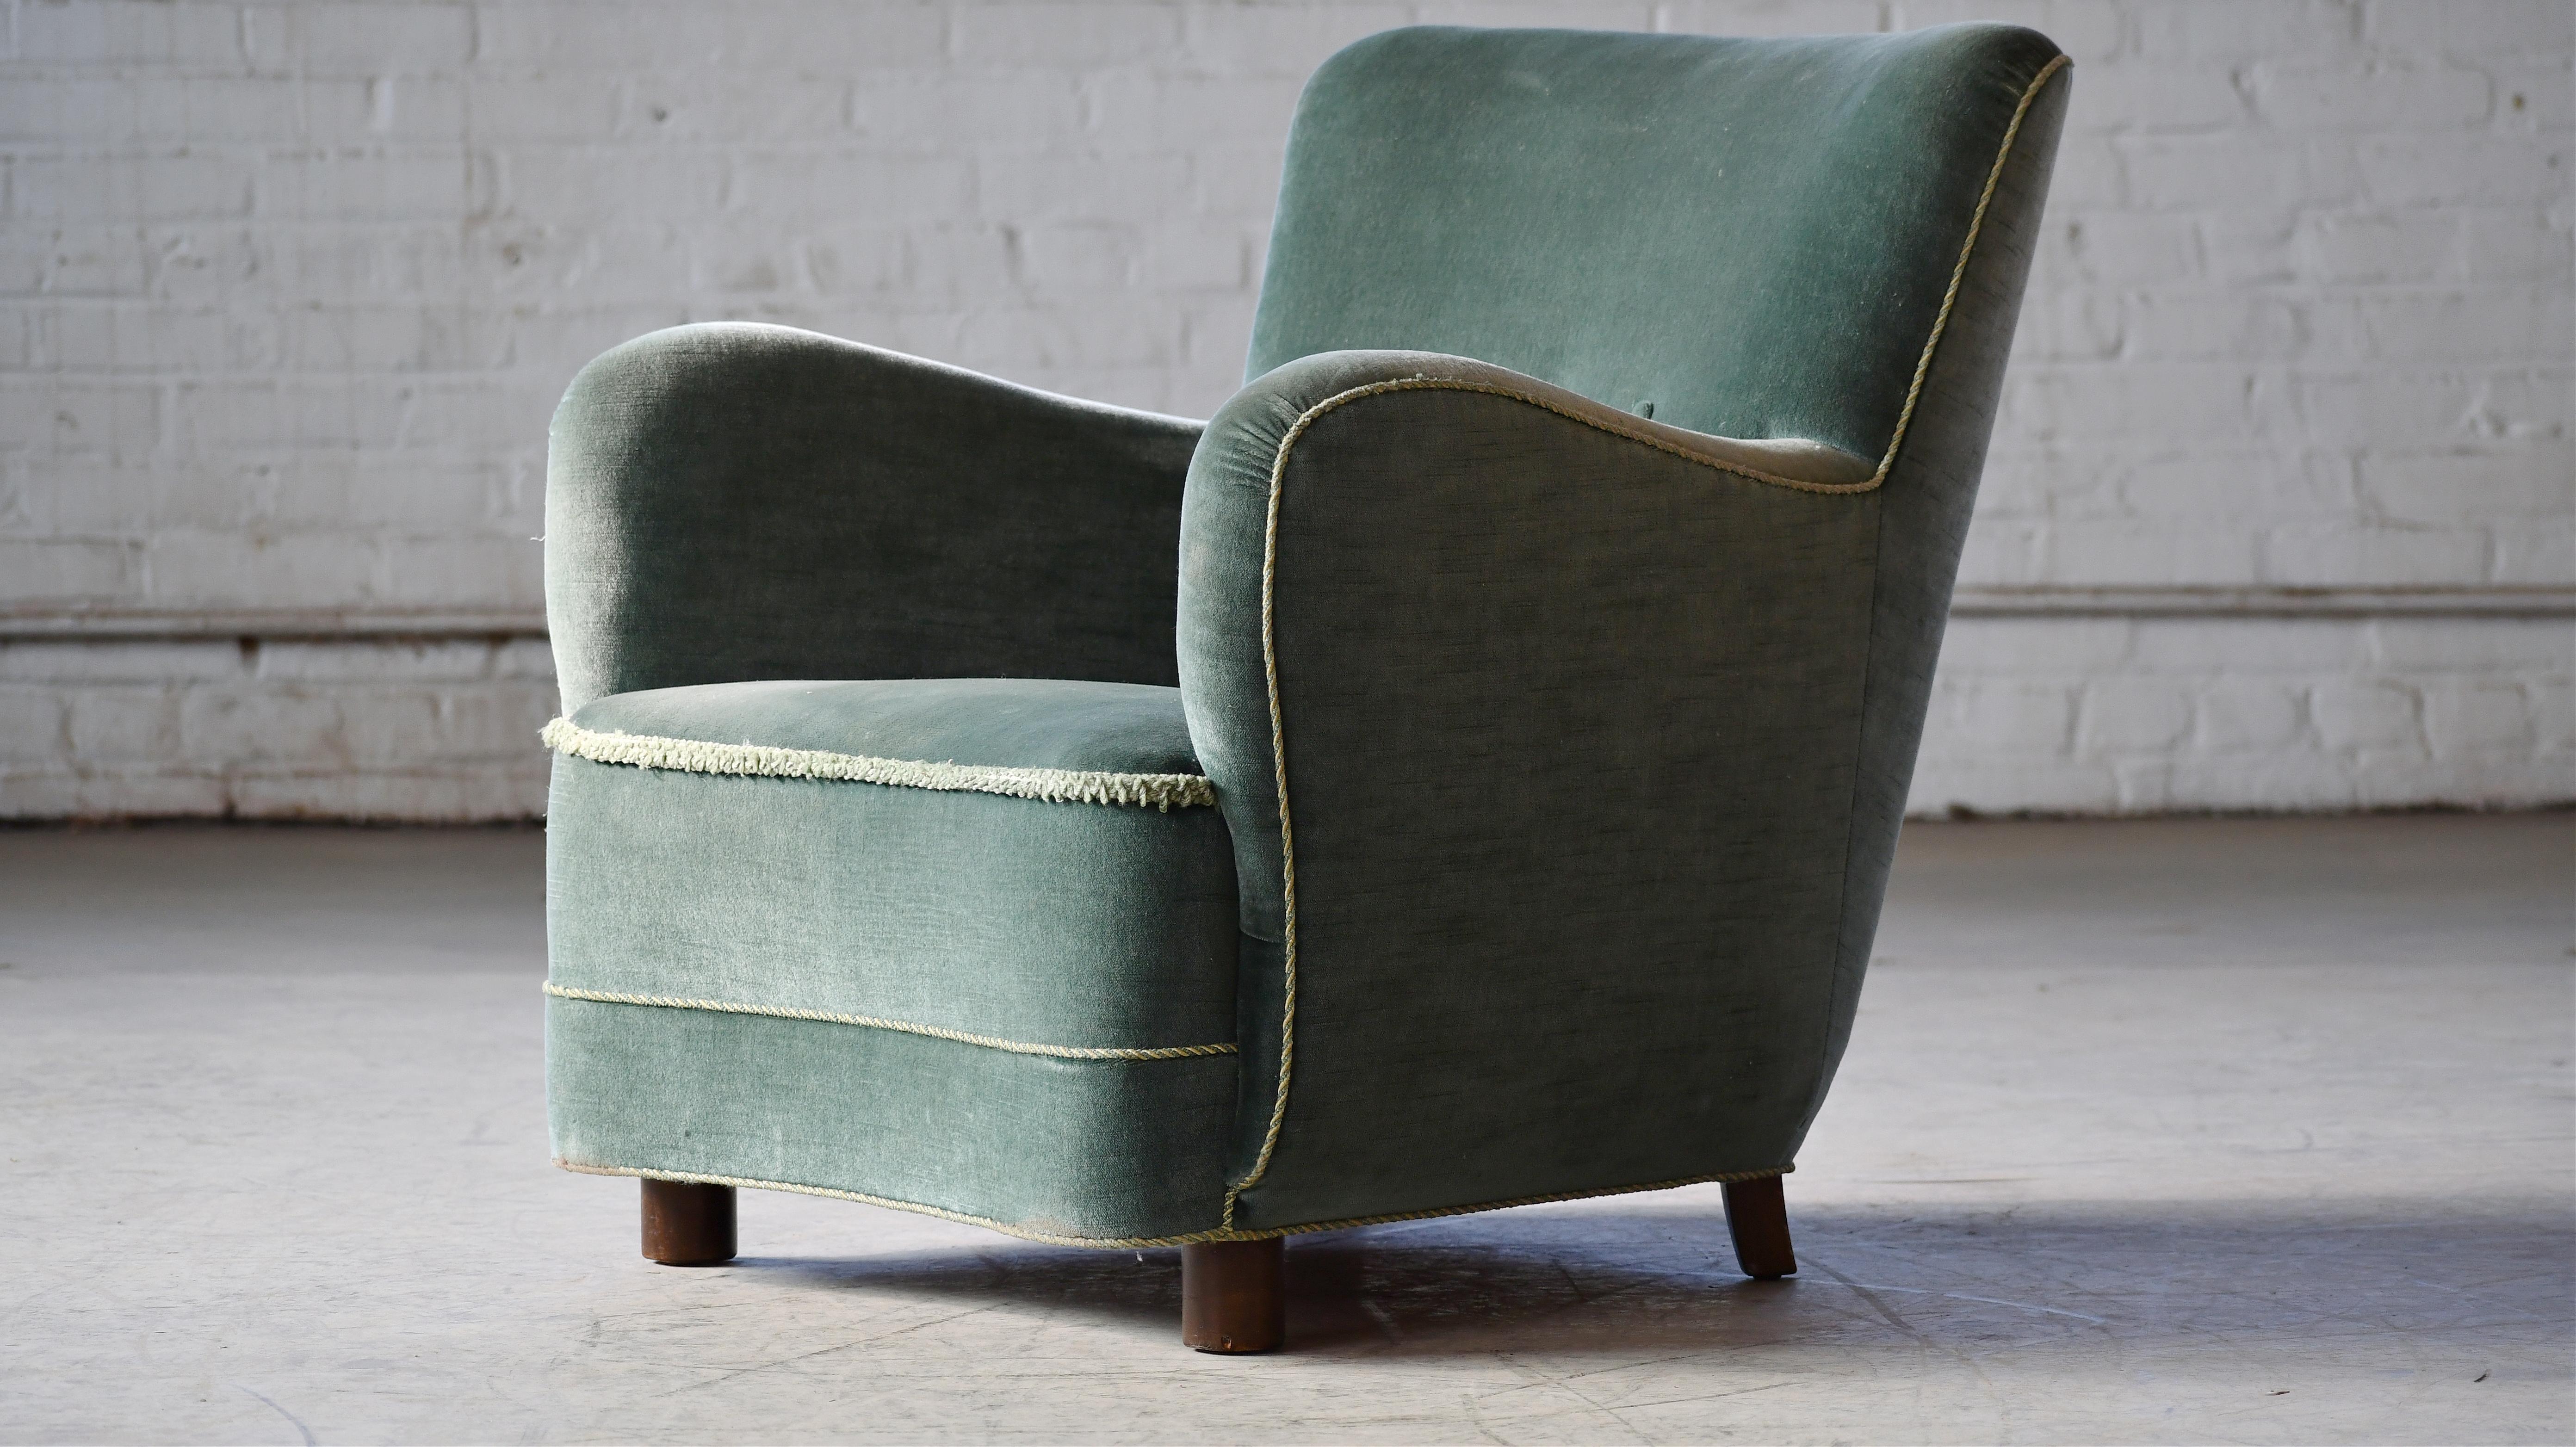 Mid-20th Century Danish Art Deco or Early Midcentury Lounge Chair in Green Mohair 1930-40s